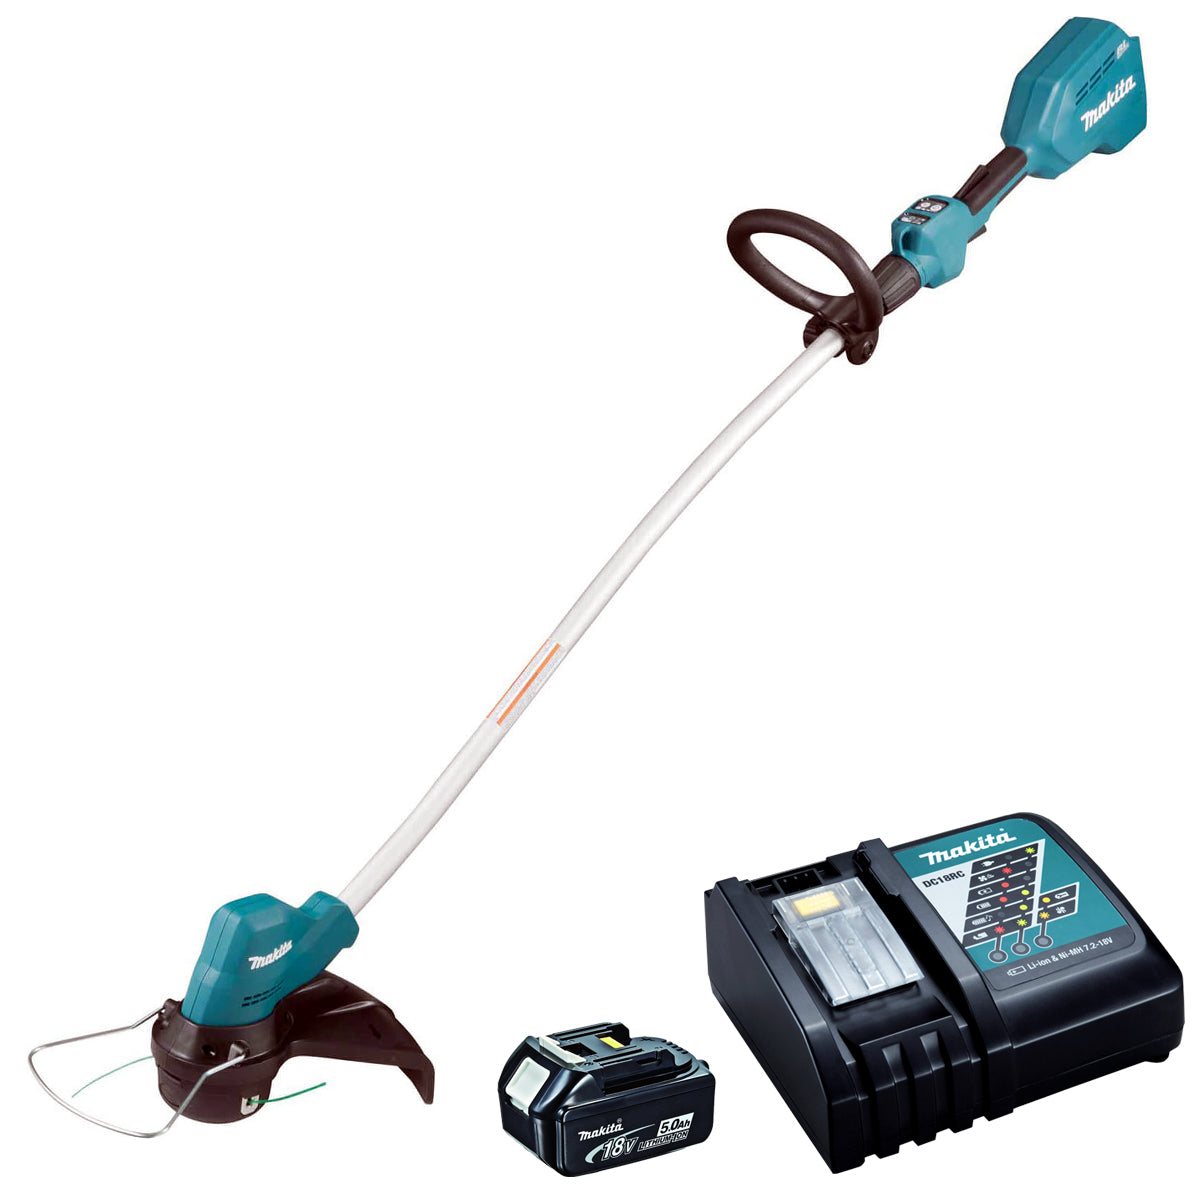 Makita DUR189RT 18V Brushless Line Timmer 30cm with 1 x 5.0Ah Battery & Charger